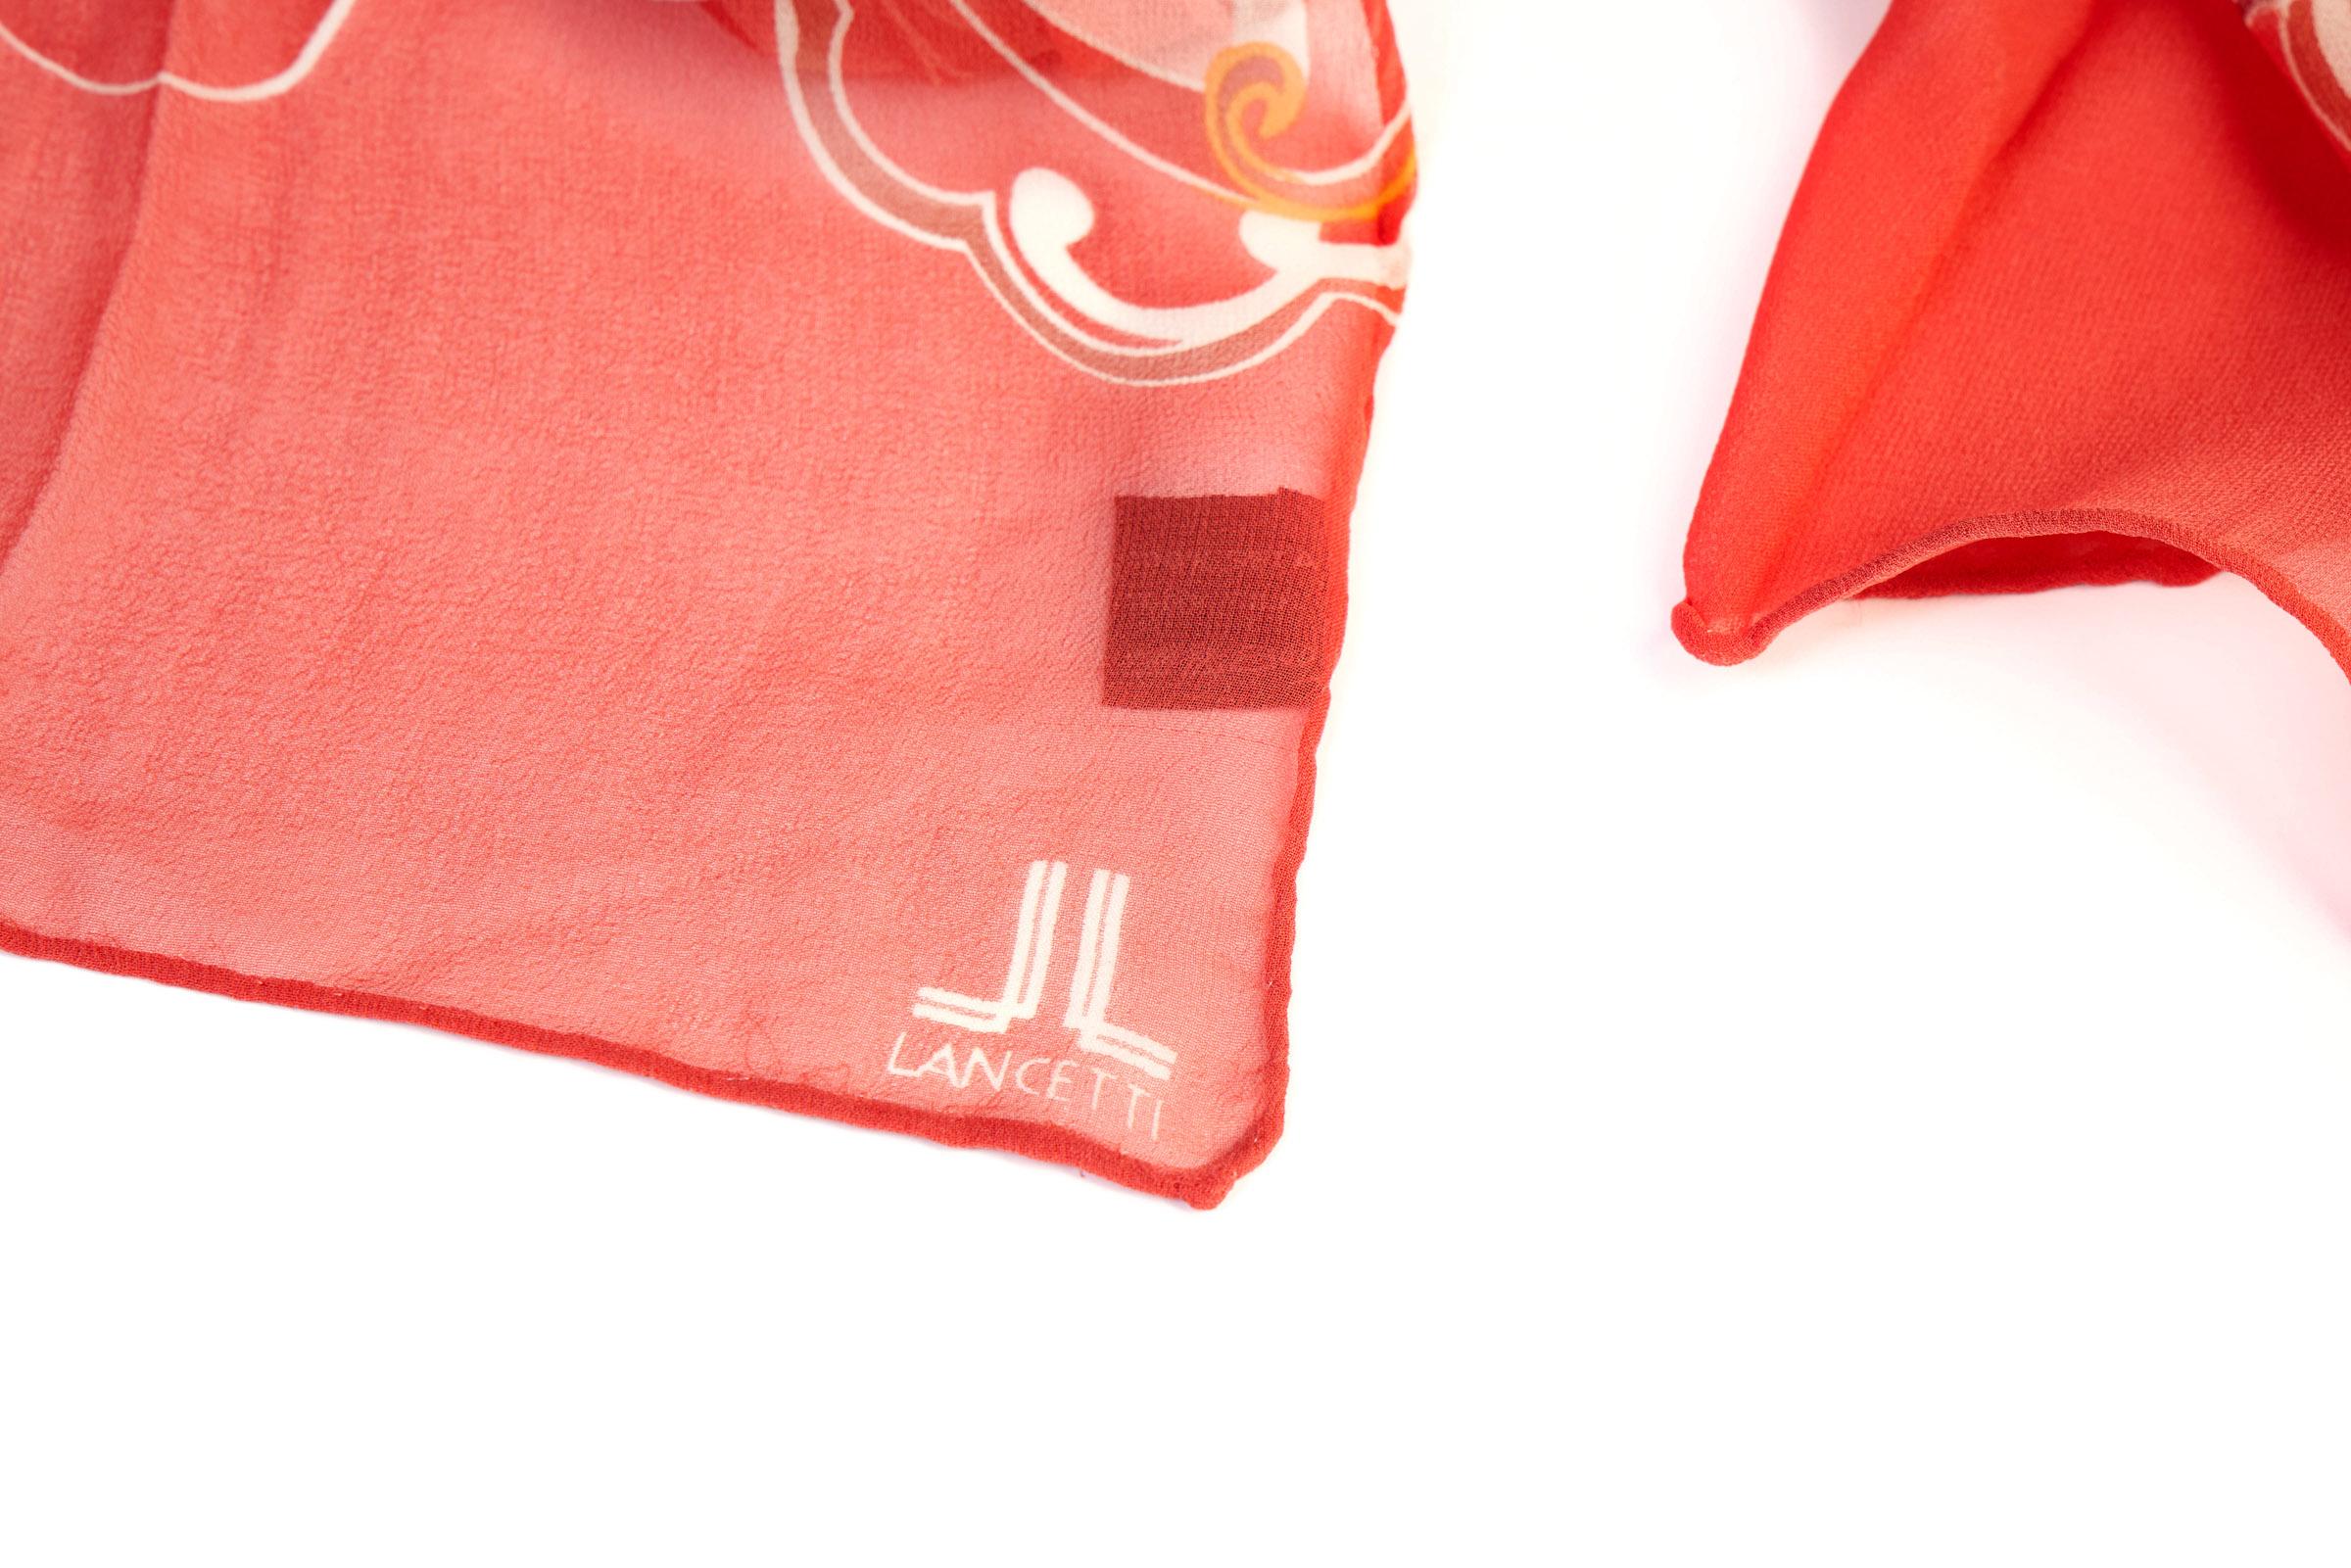 Lancetti vintage coral silk chiffon scarf with floral design. Hand rolled edges. Original care tag.